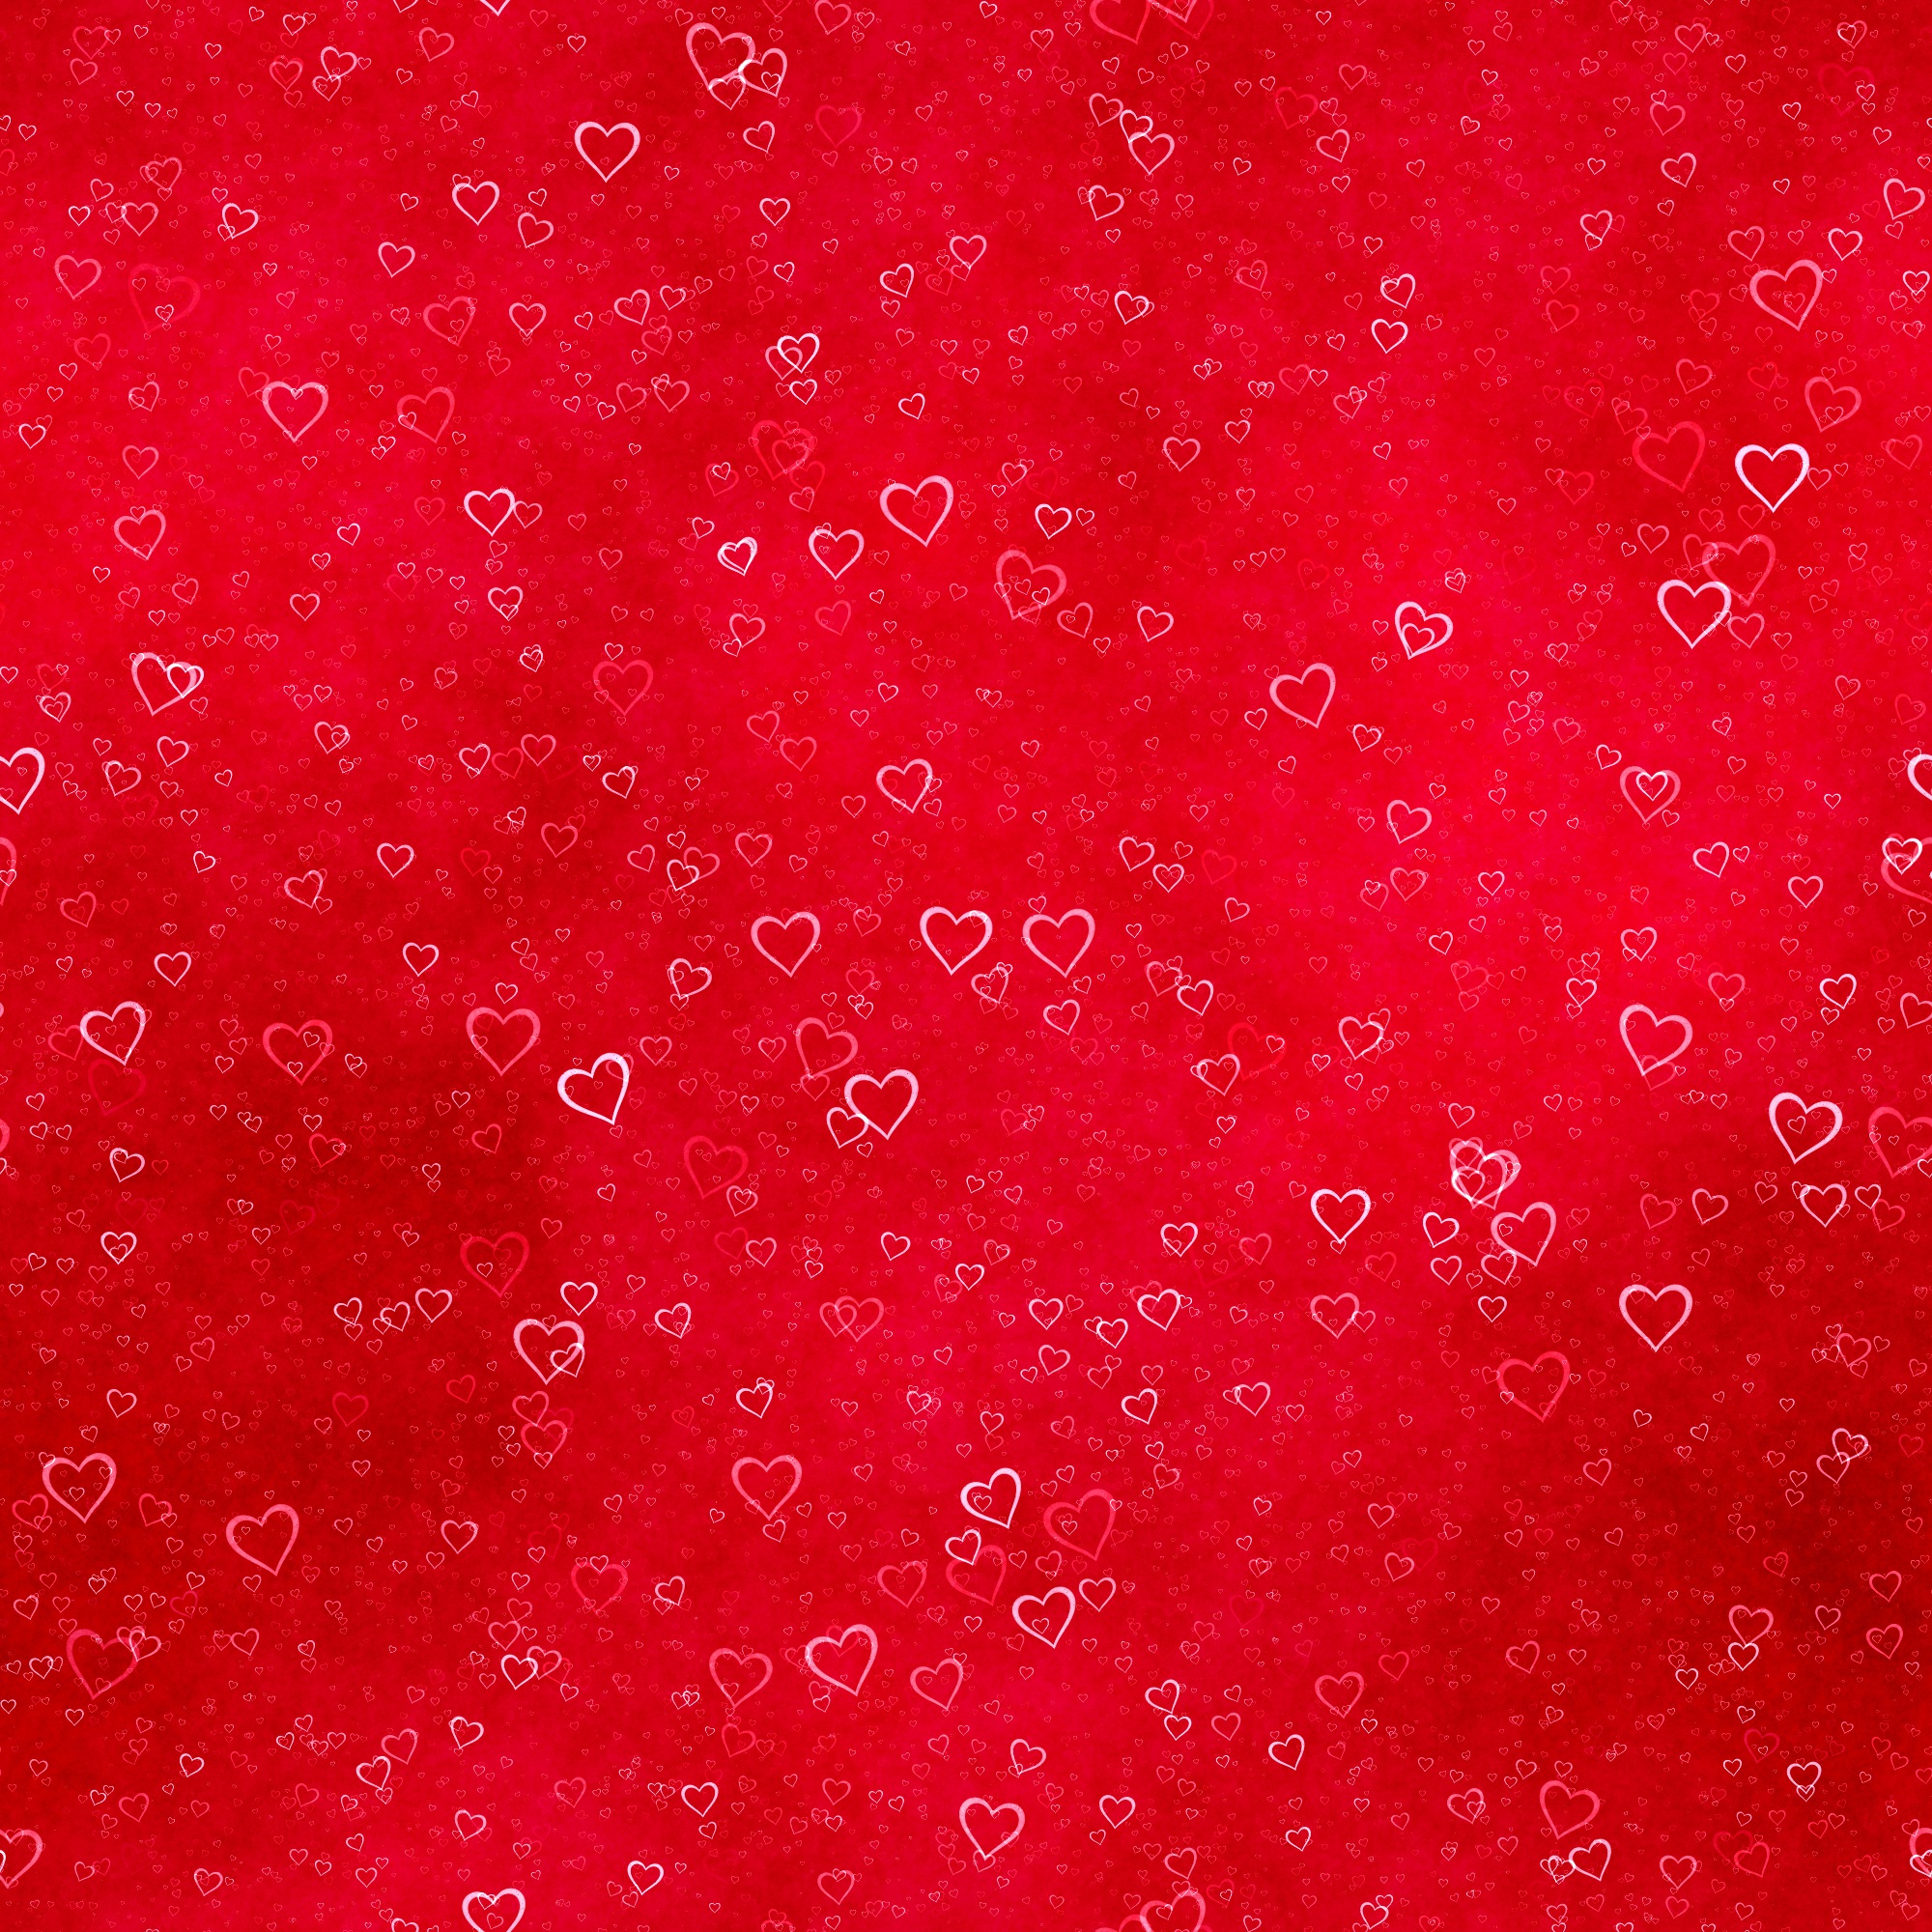 hearts, love, red, texture